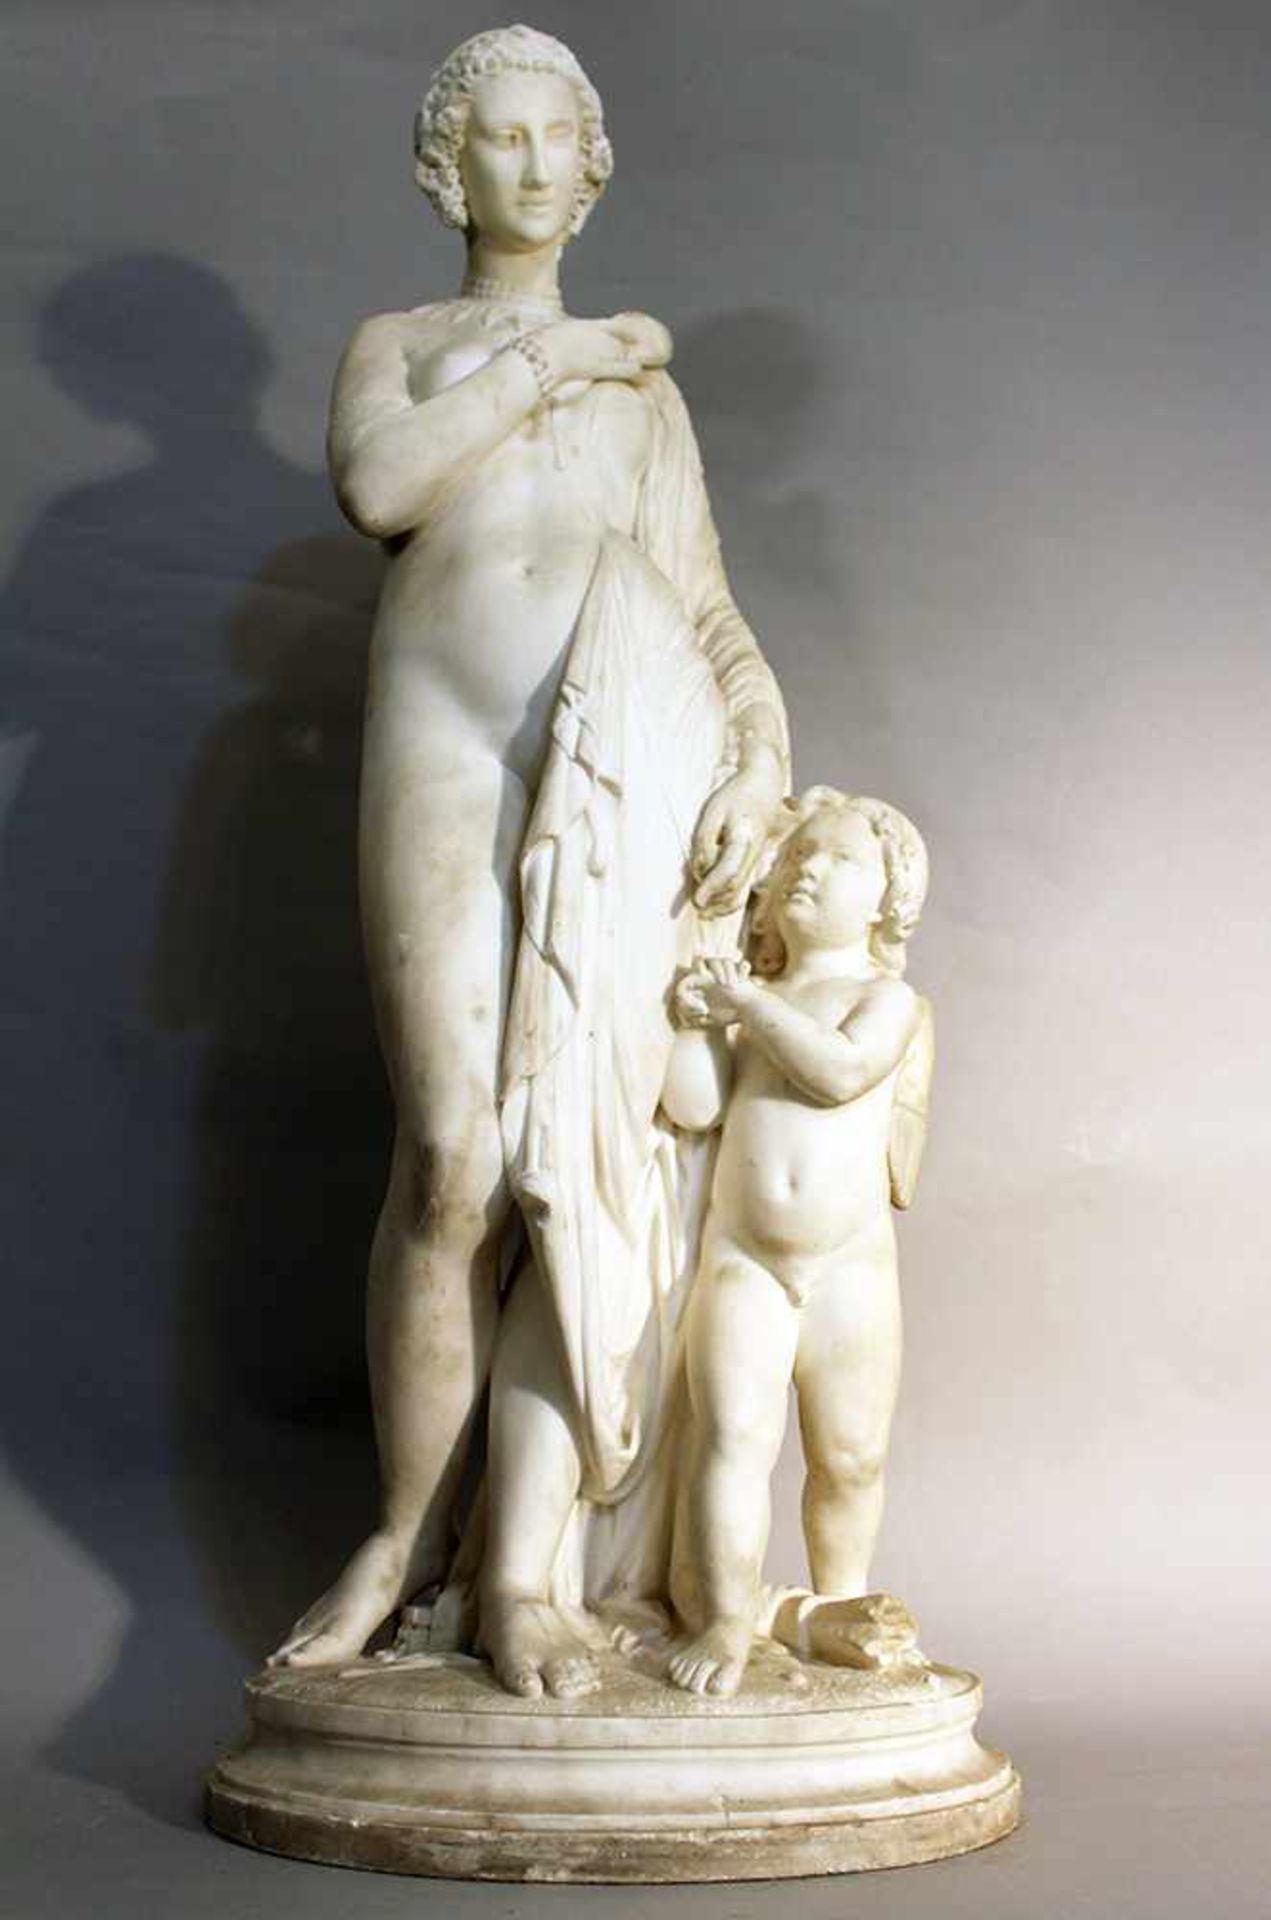 Giovanni Maria Benzoni (1809-1873), Marble sculpture of Amor and Psyche; she with toga, mirror and